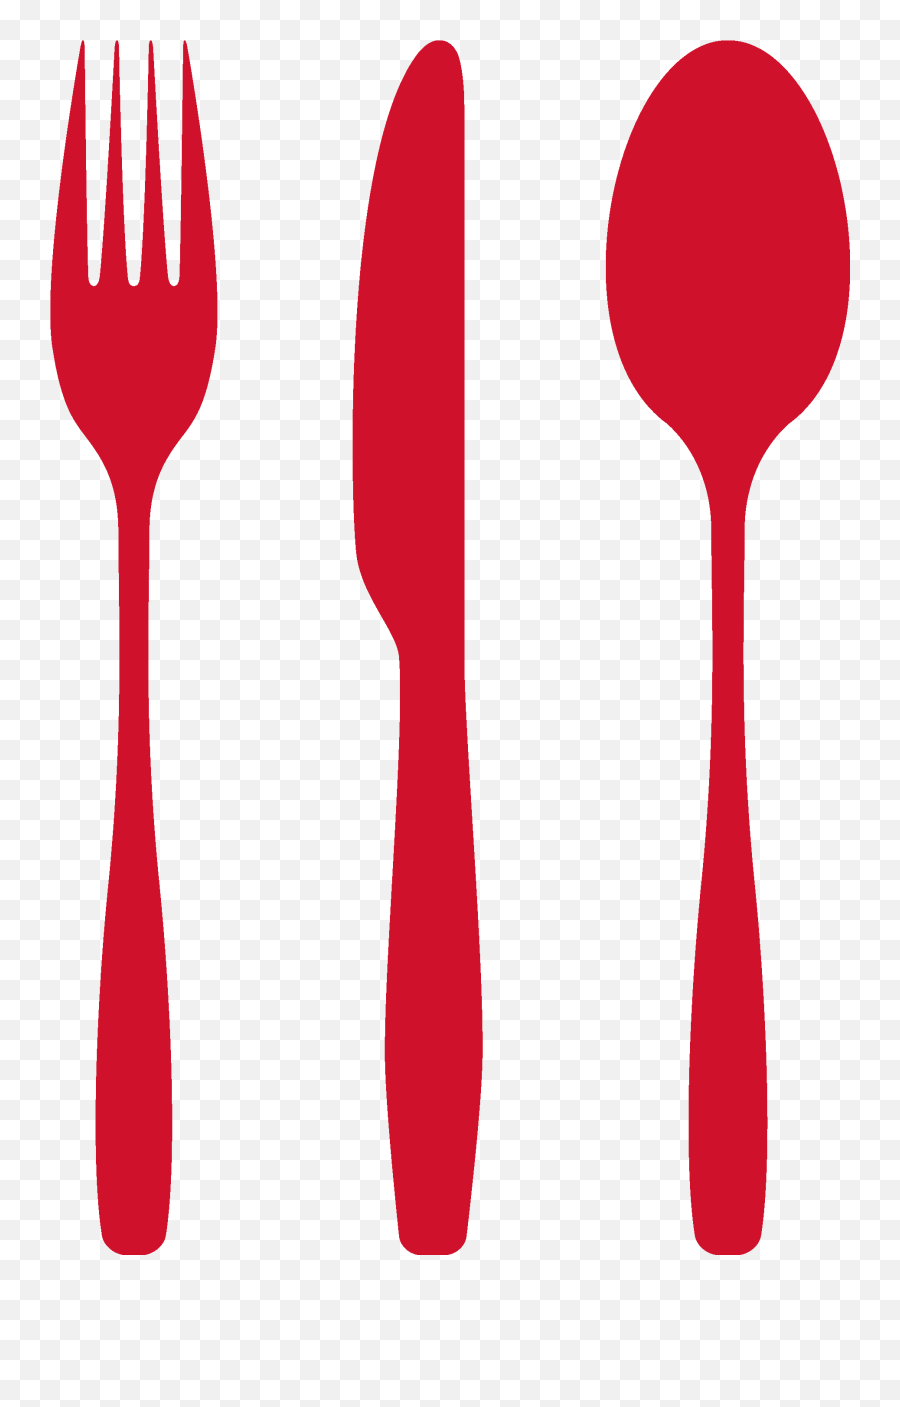 Fork Clipart Red Spoon Fork Red Spoon - Red Spoon And Fork Png Emoji,Spoon Emoji